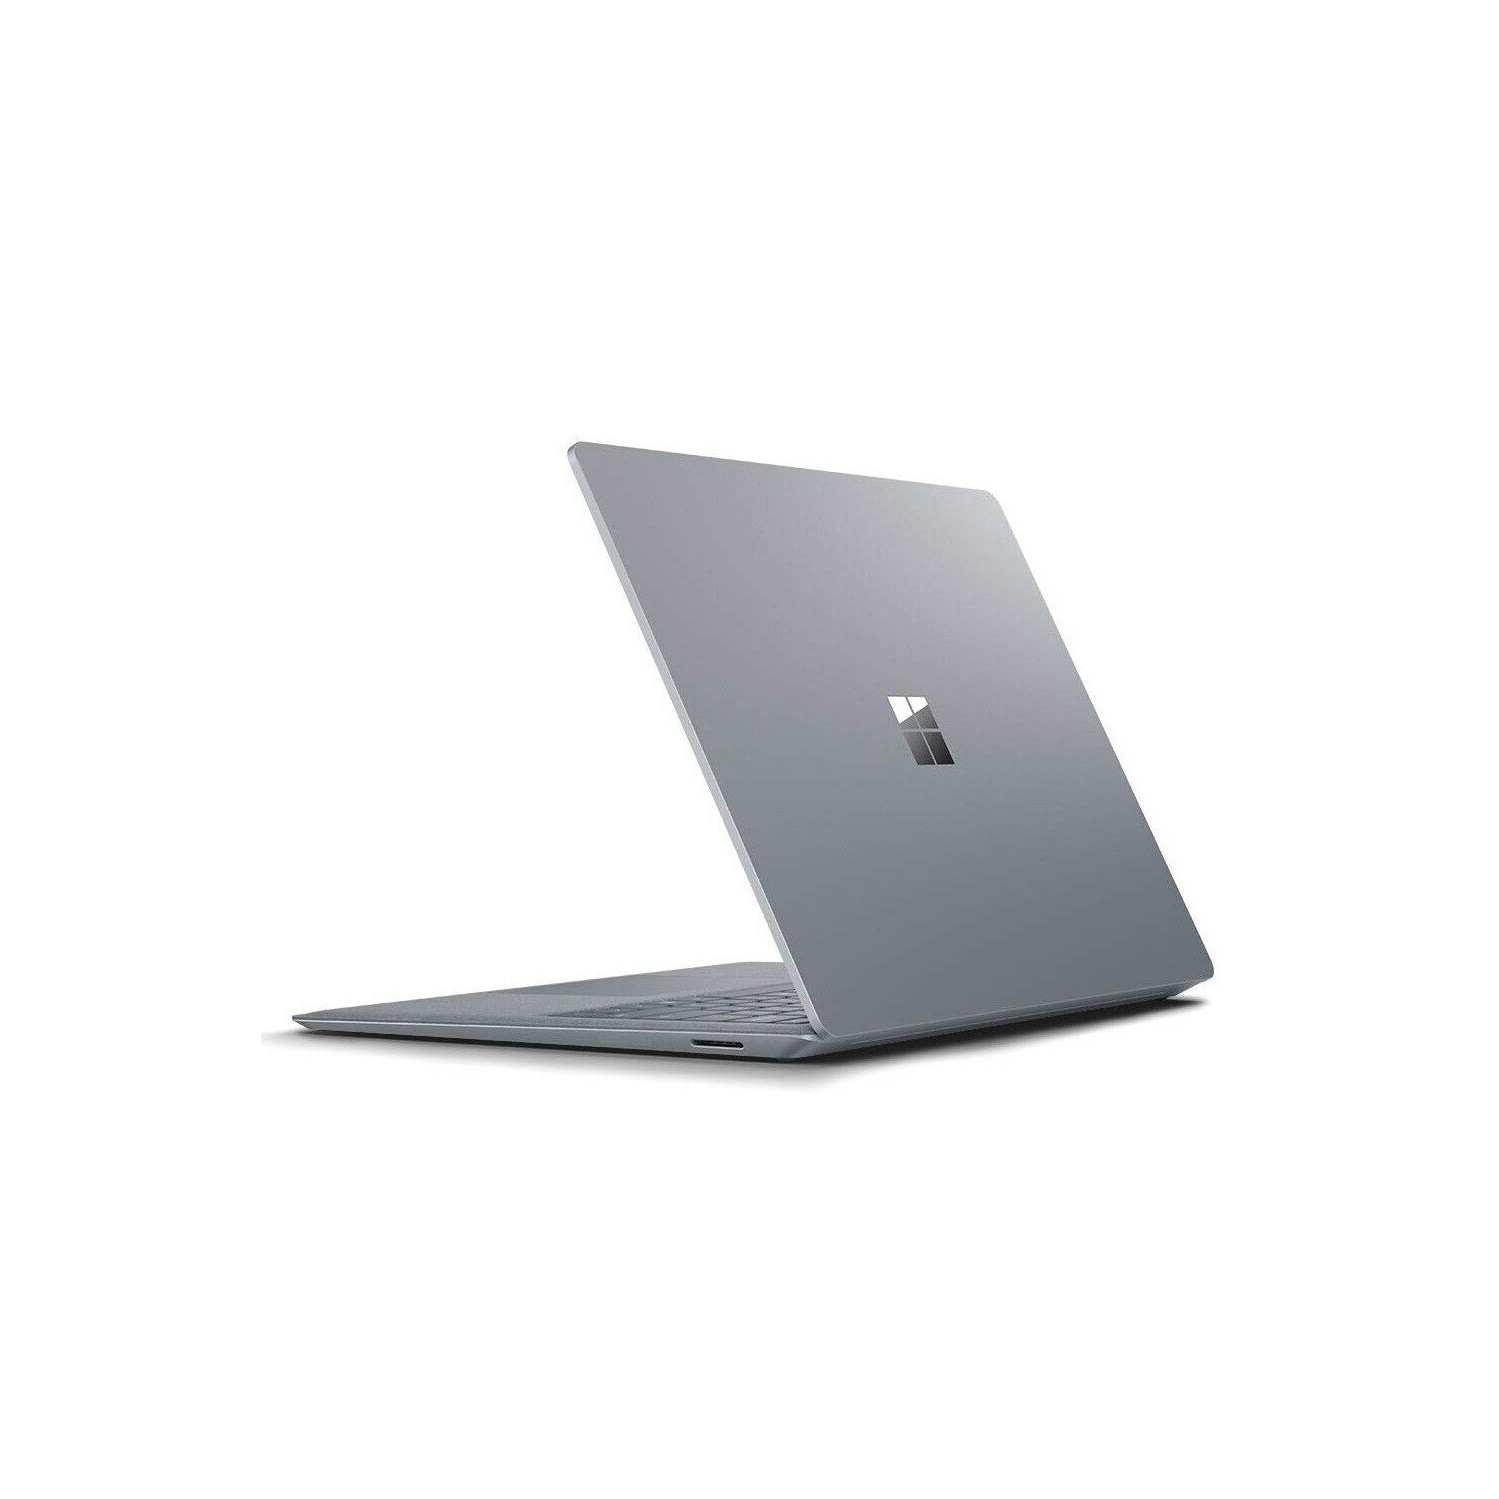 Refurbished (Excellent) - Microsoft Surface Laptop 3 Model 1867 (Silver ) - 13.5" Touch-Screen – Intel Core i5-1035G7, 8GB, 256GB SSD, Windows 10 Pro W/free wireless mouse